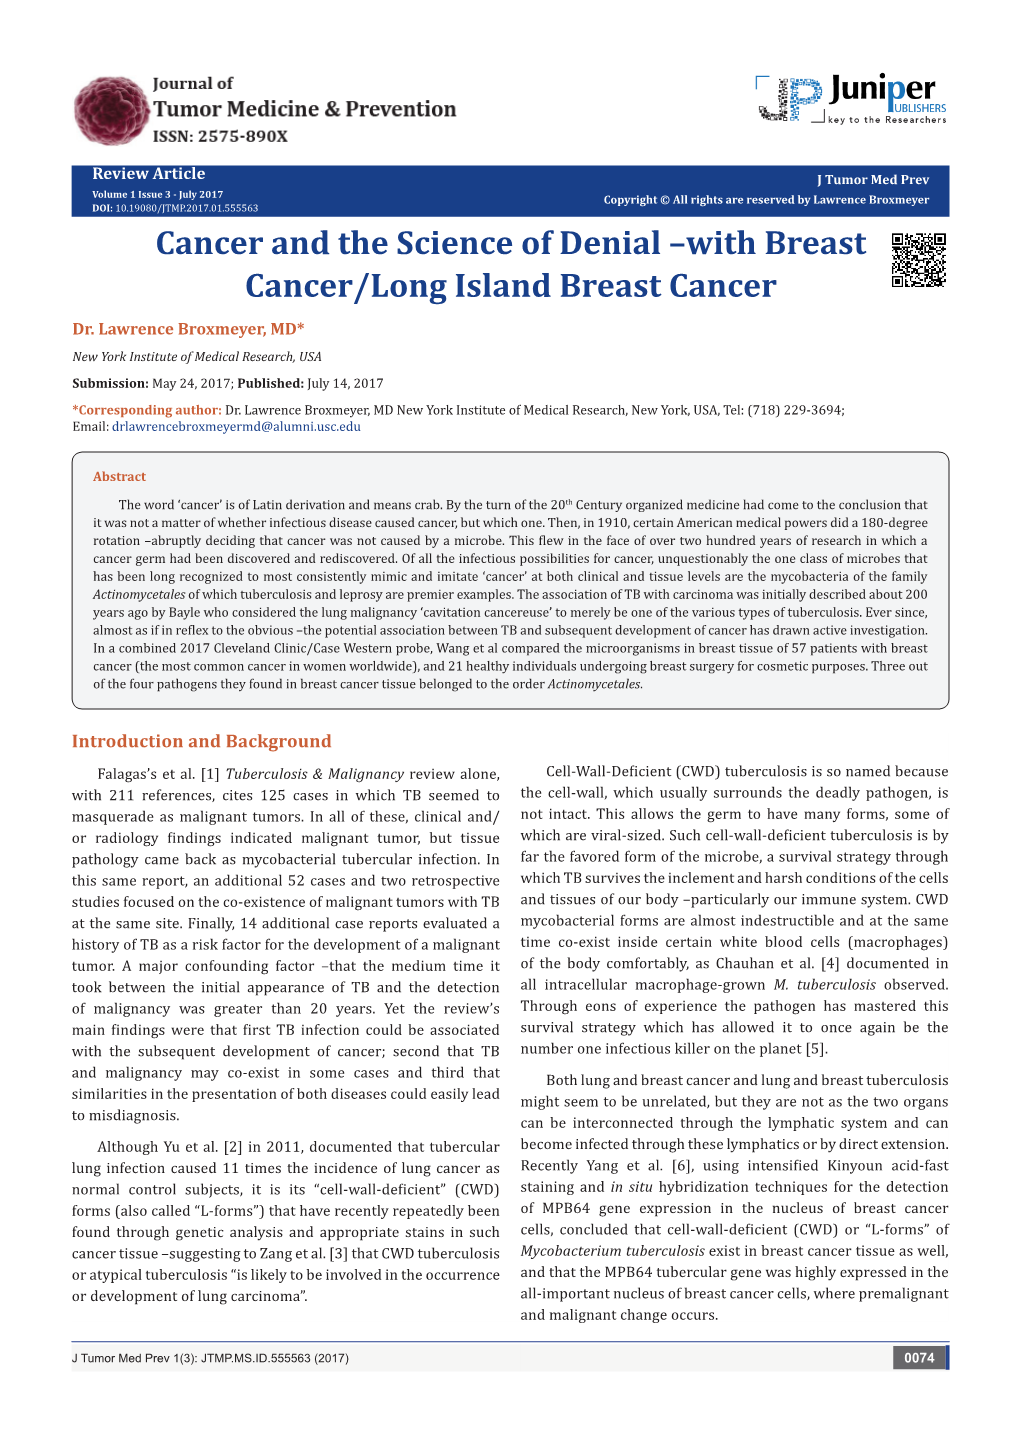 Cancer and the Science of Denial with Breast Cancer/Long Island Breast